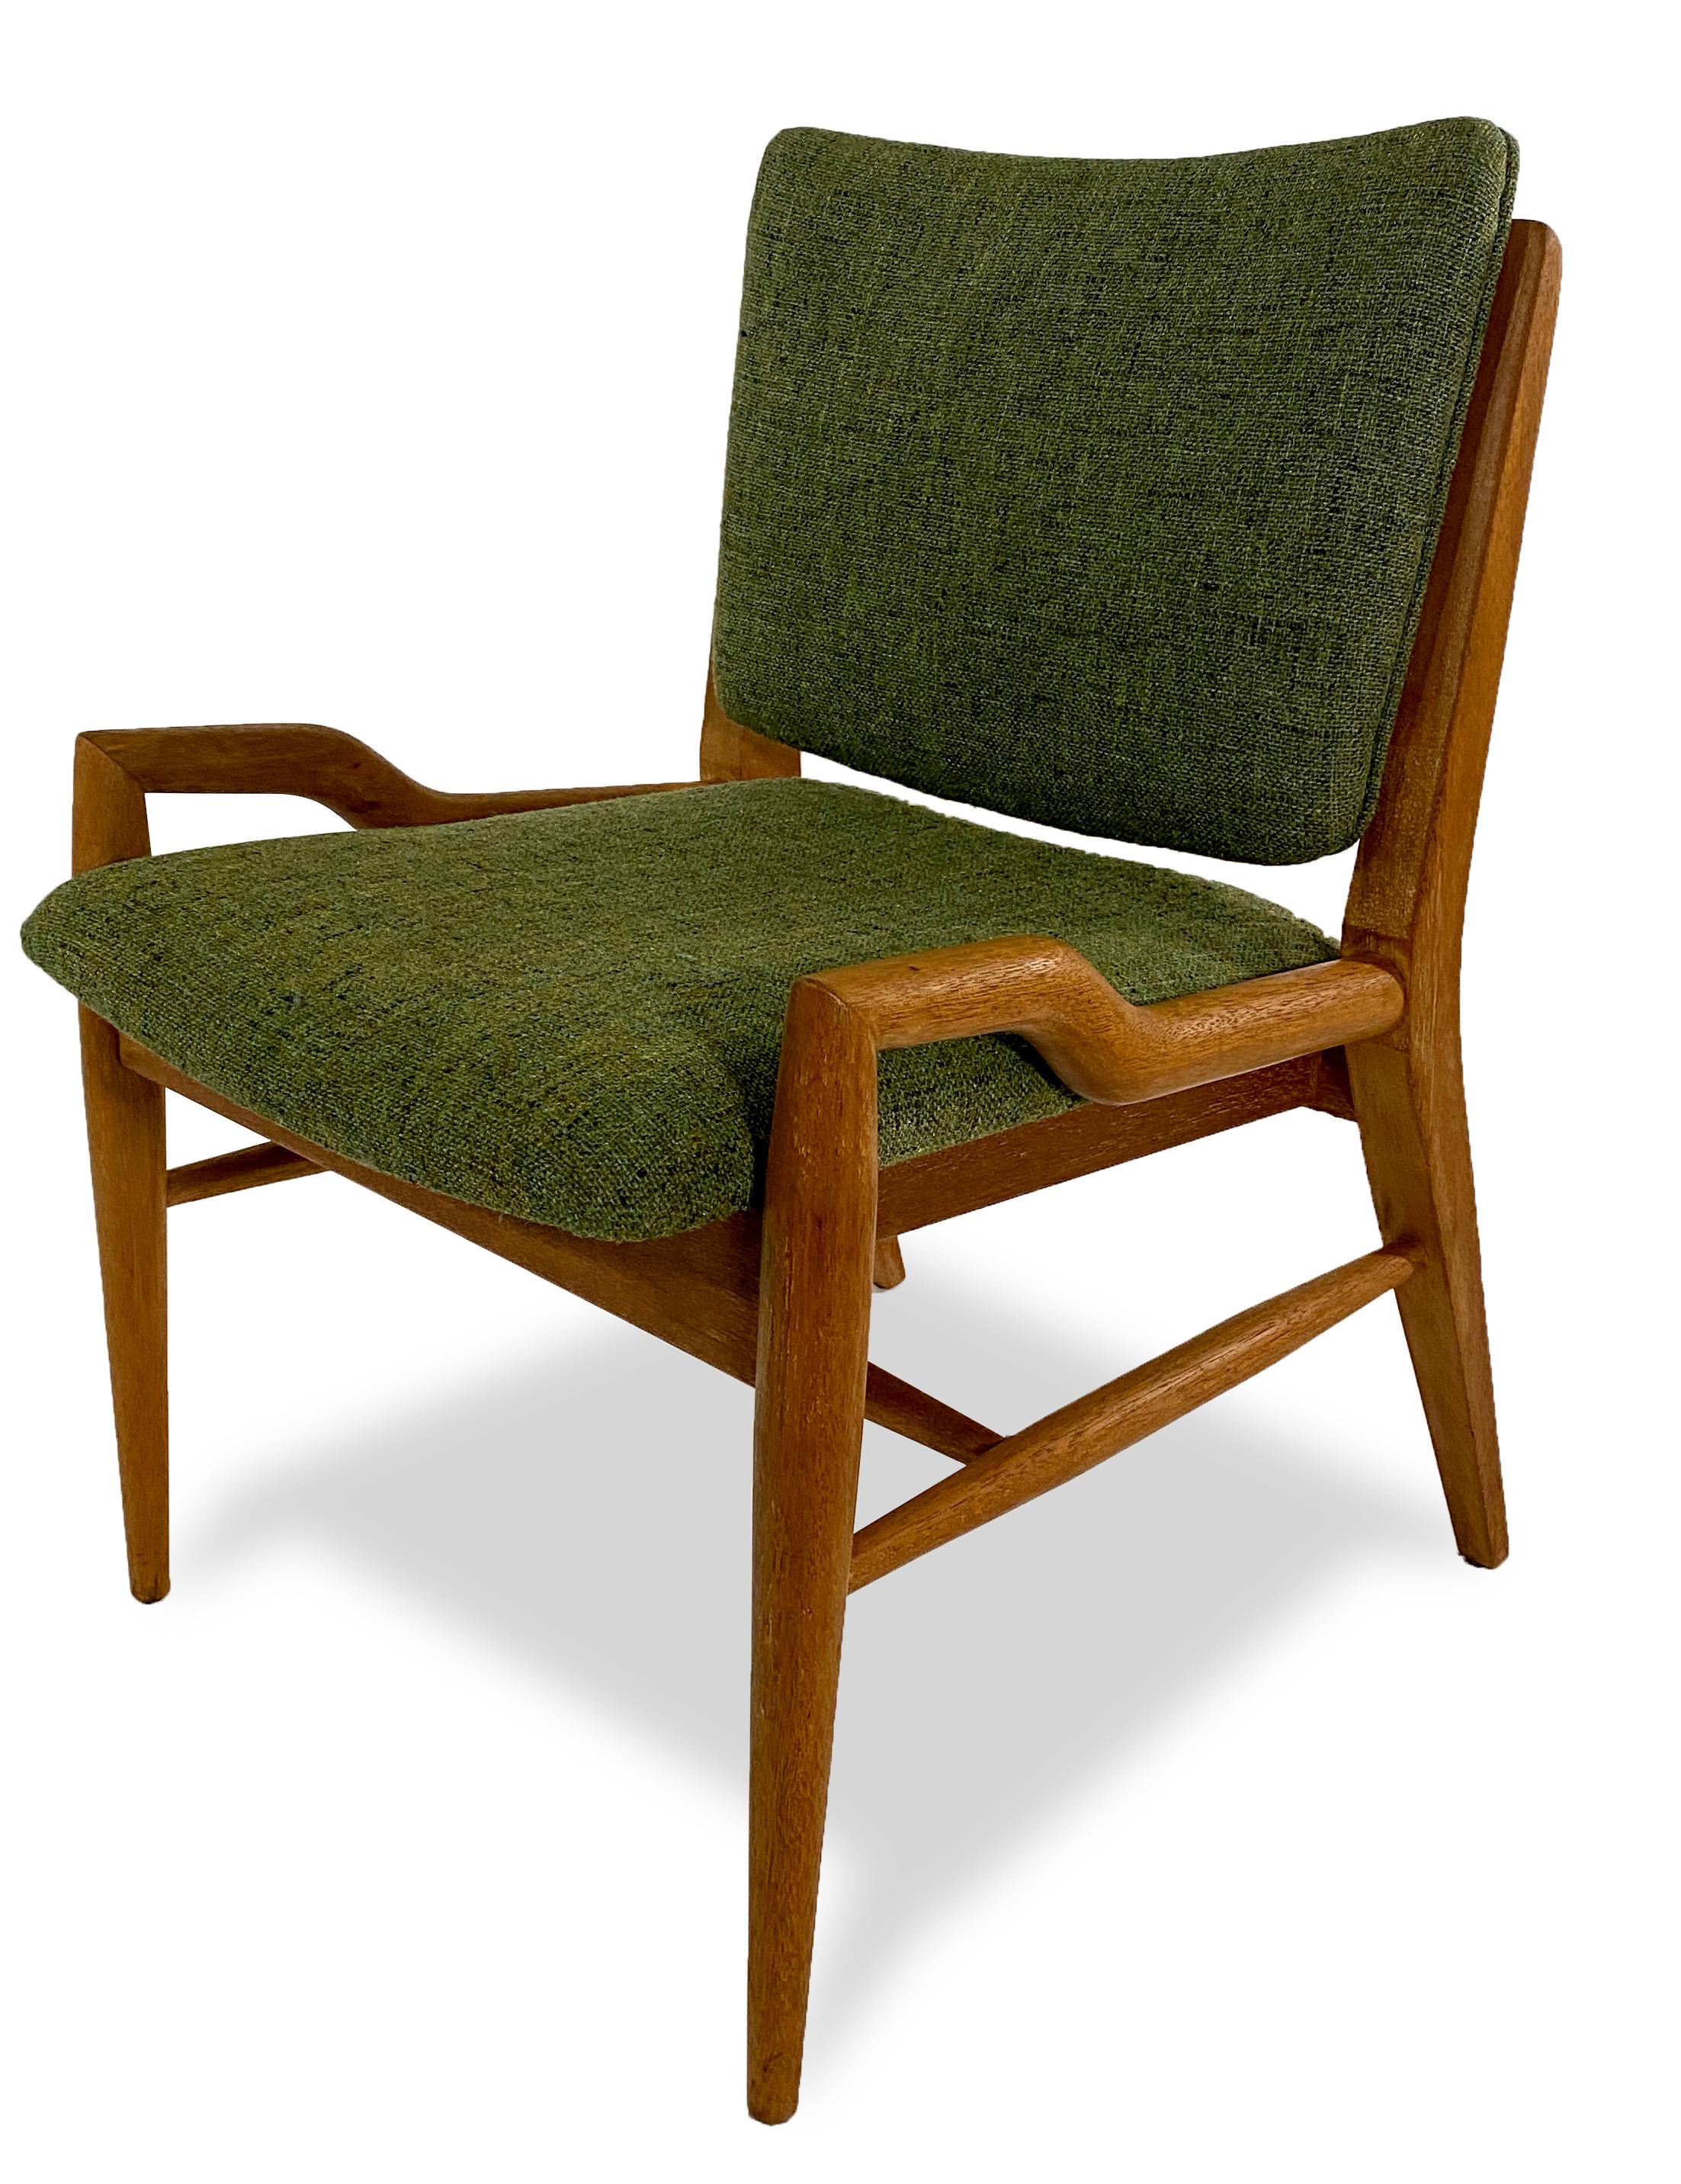 A set of 6 modern American armchairs by John Keal for brown saltman. Original green fabric, stylized lower arm on all chairs, Curved detailing on the back of the chair. Mahogany. Sold as set of 6. Measure: Seat height 17